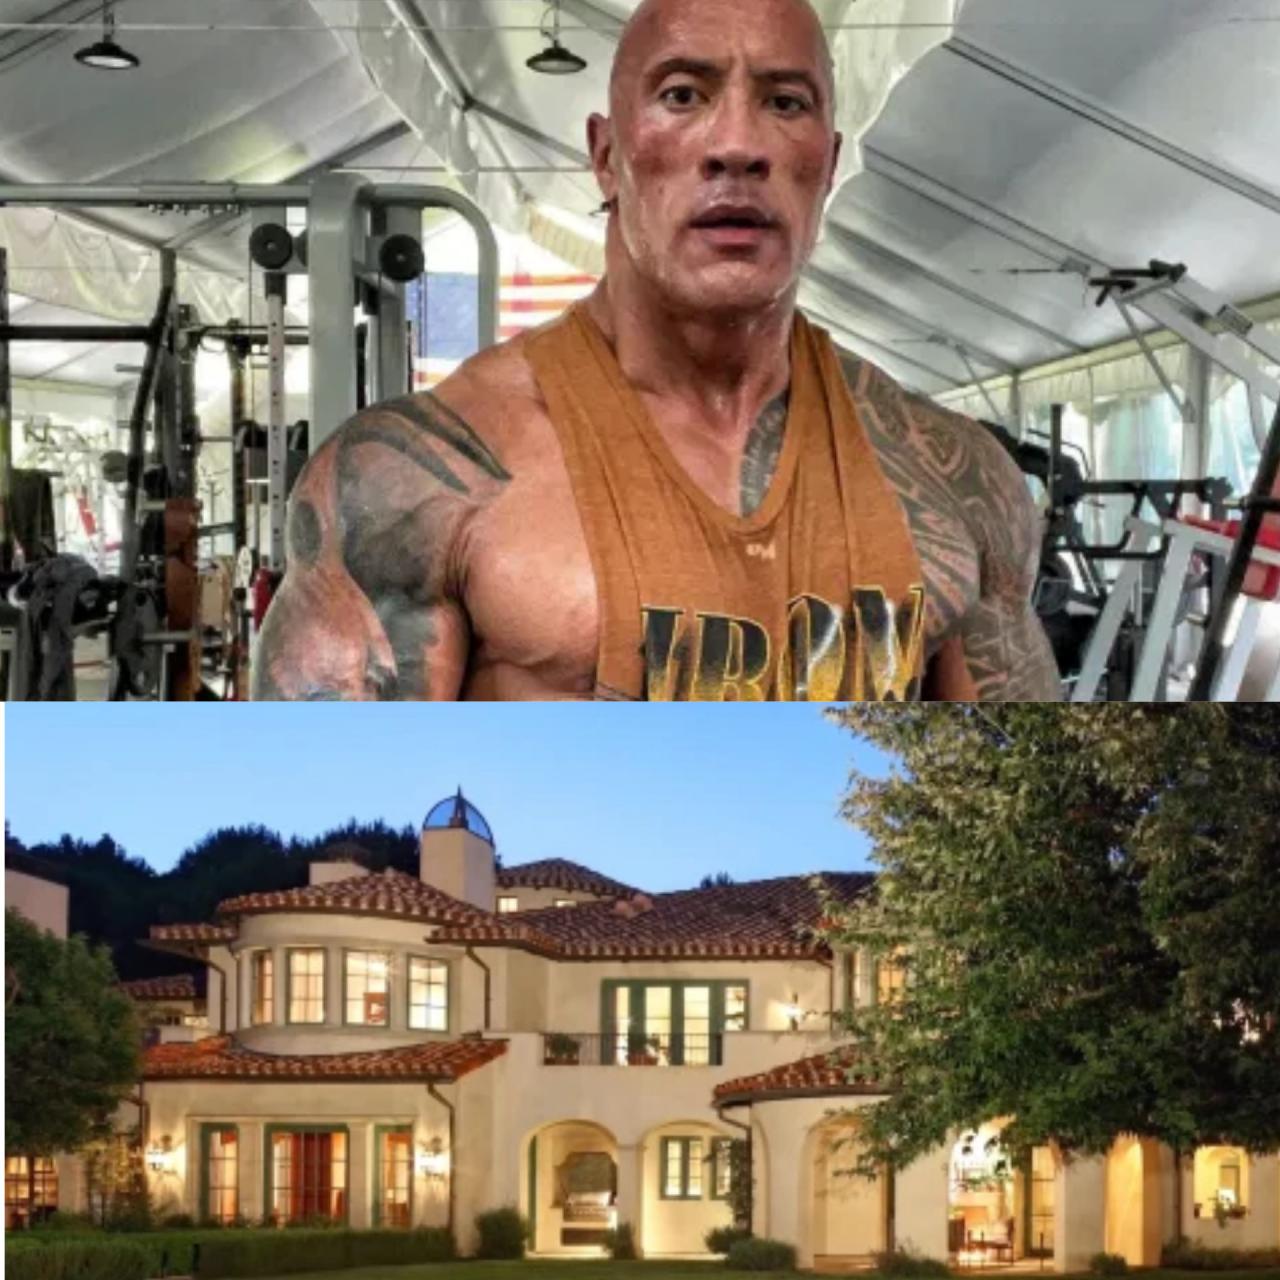 The Rock buys .8m mansion with full-size tennis court, a baseball pitch, guest house, movie theater & music studio (Photos)     